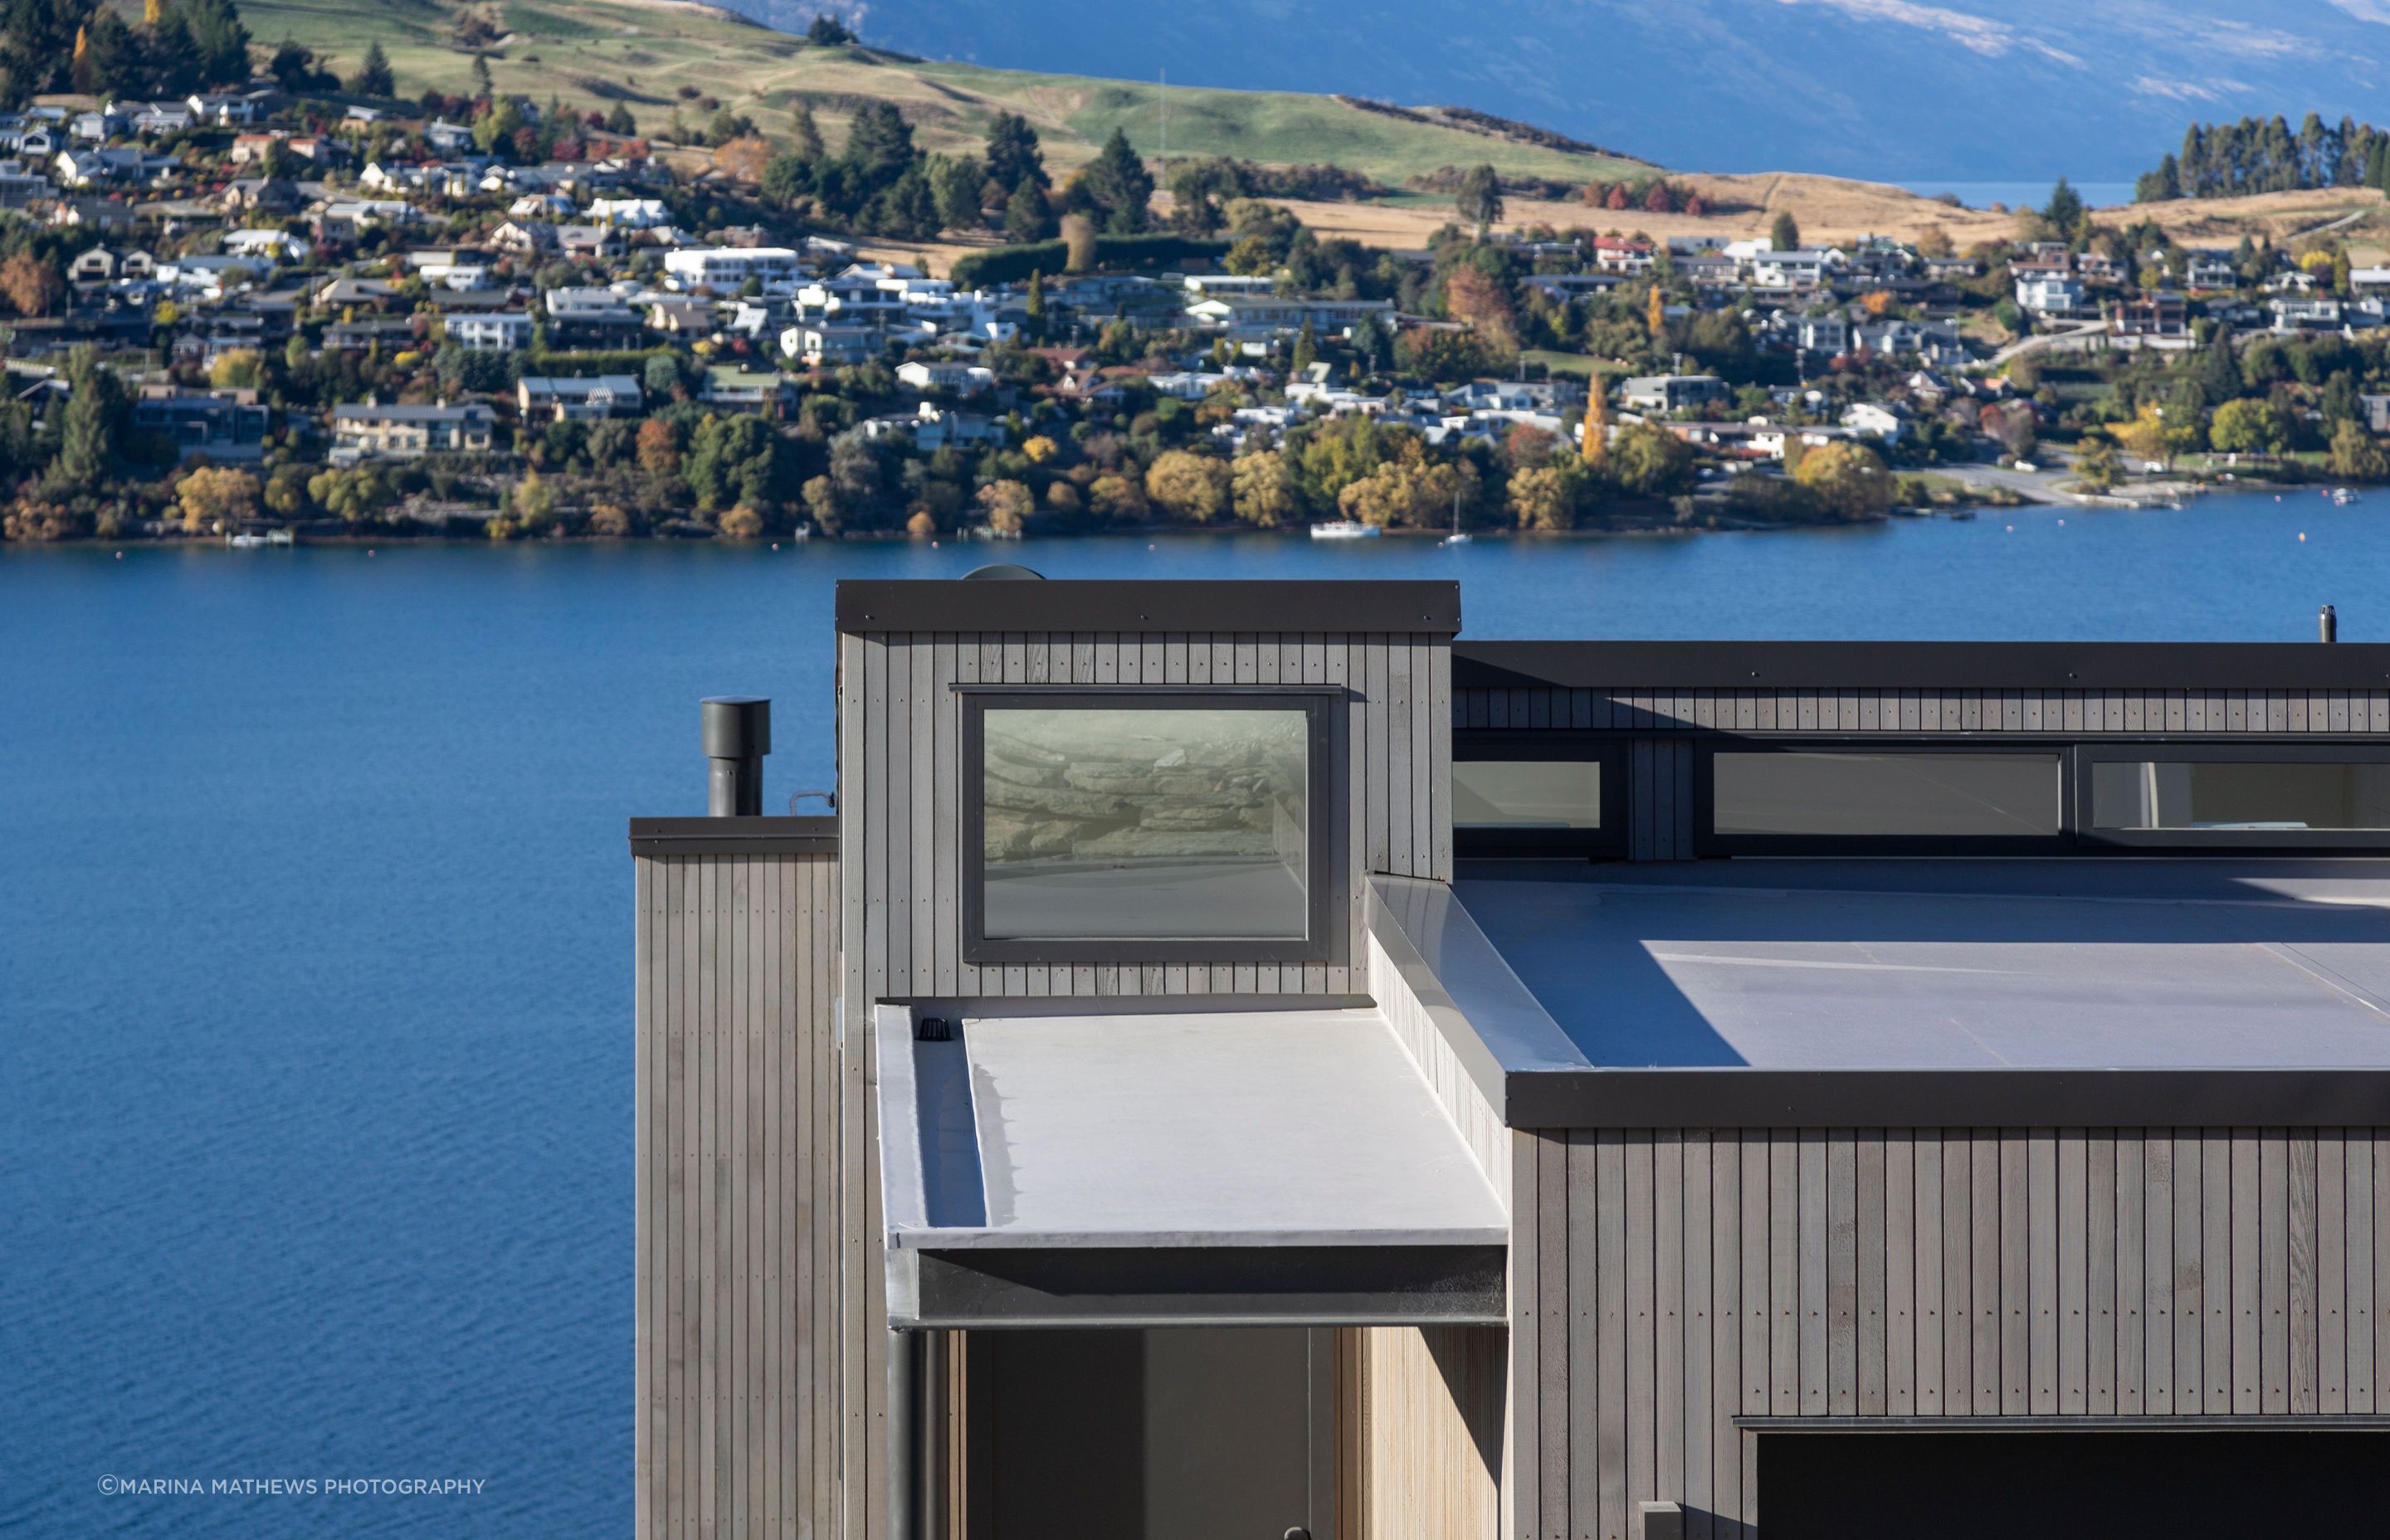 The villas are situated on an elevated site above Lake Wakatipu